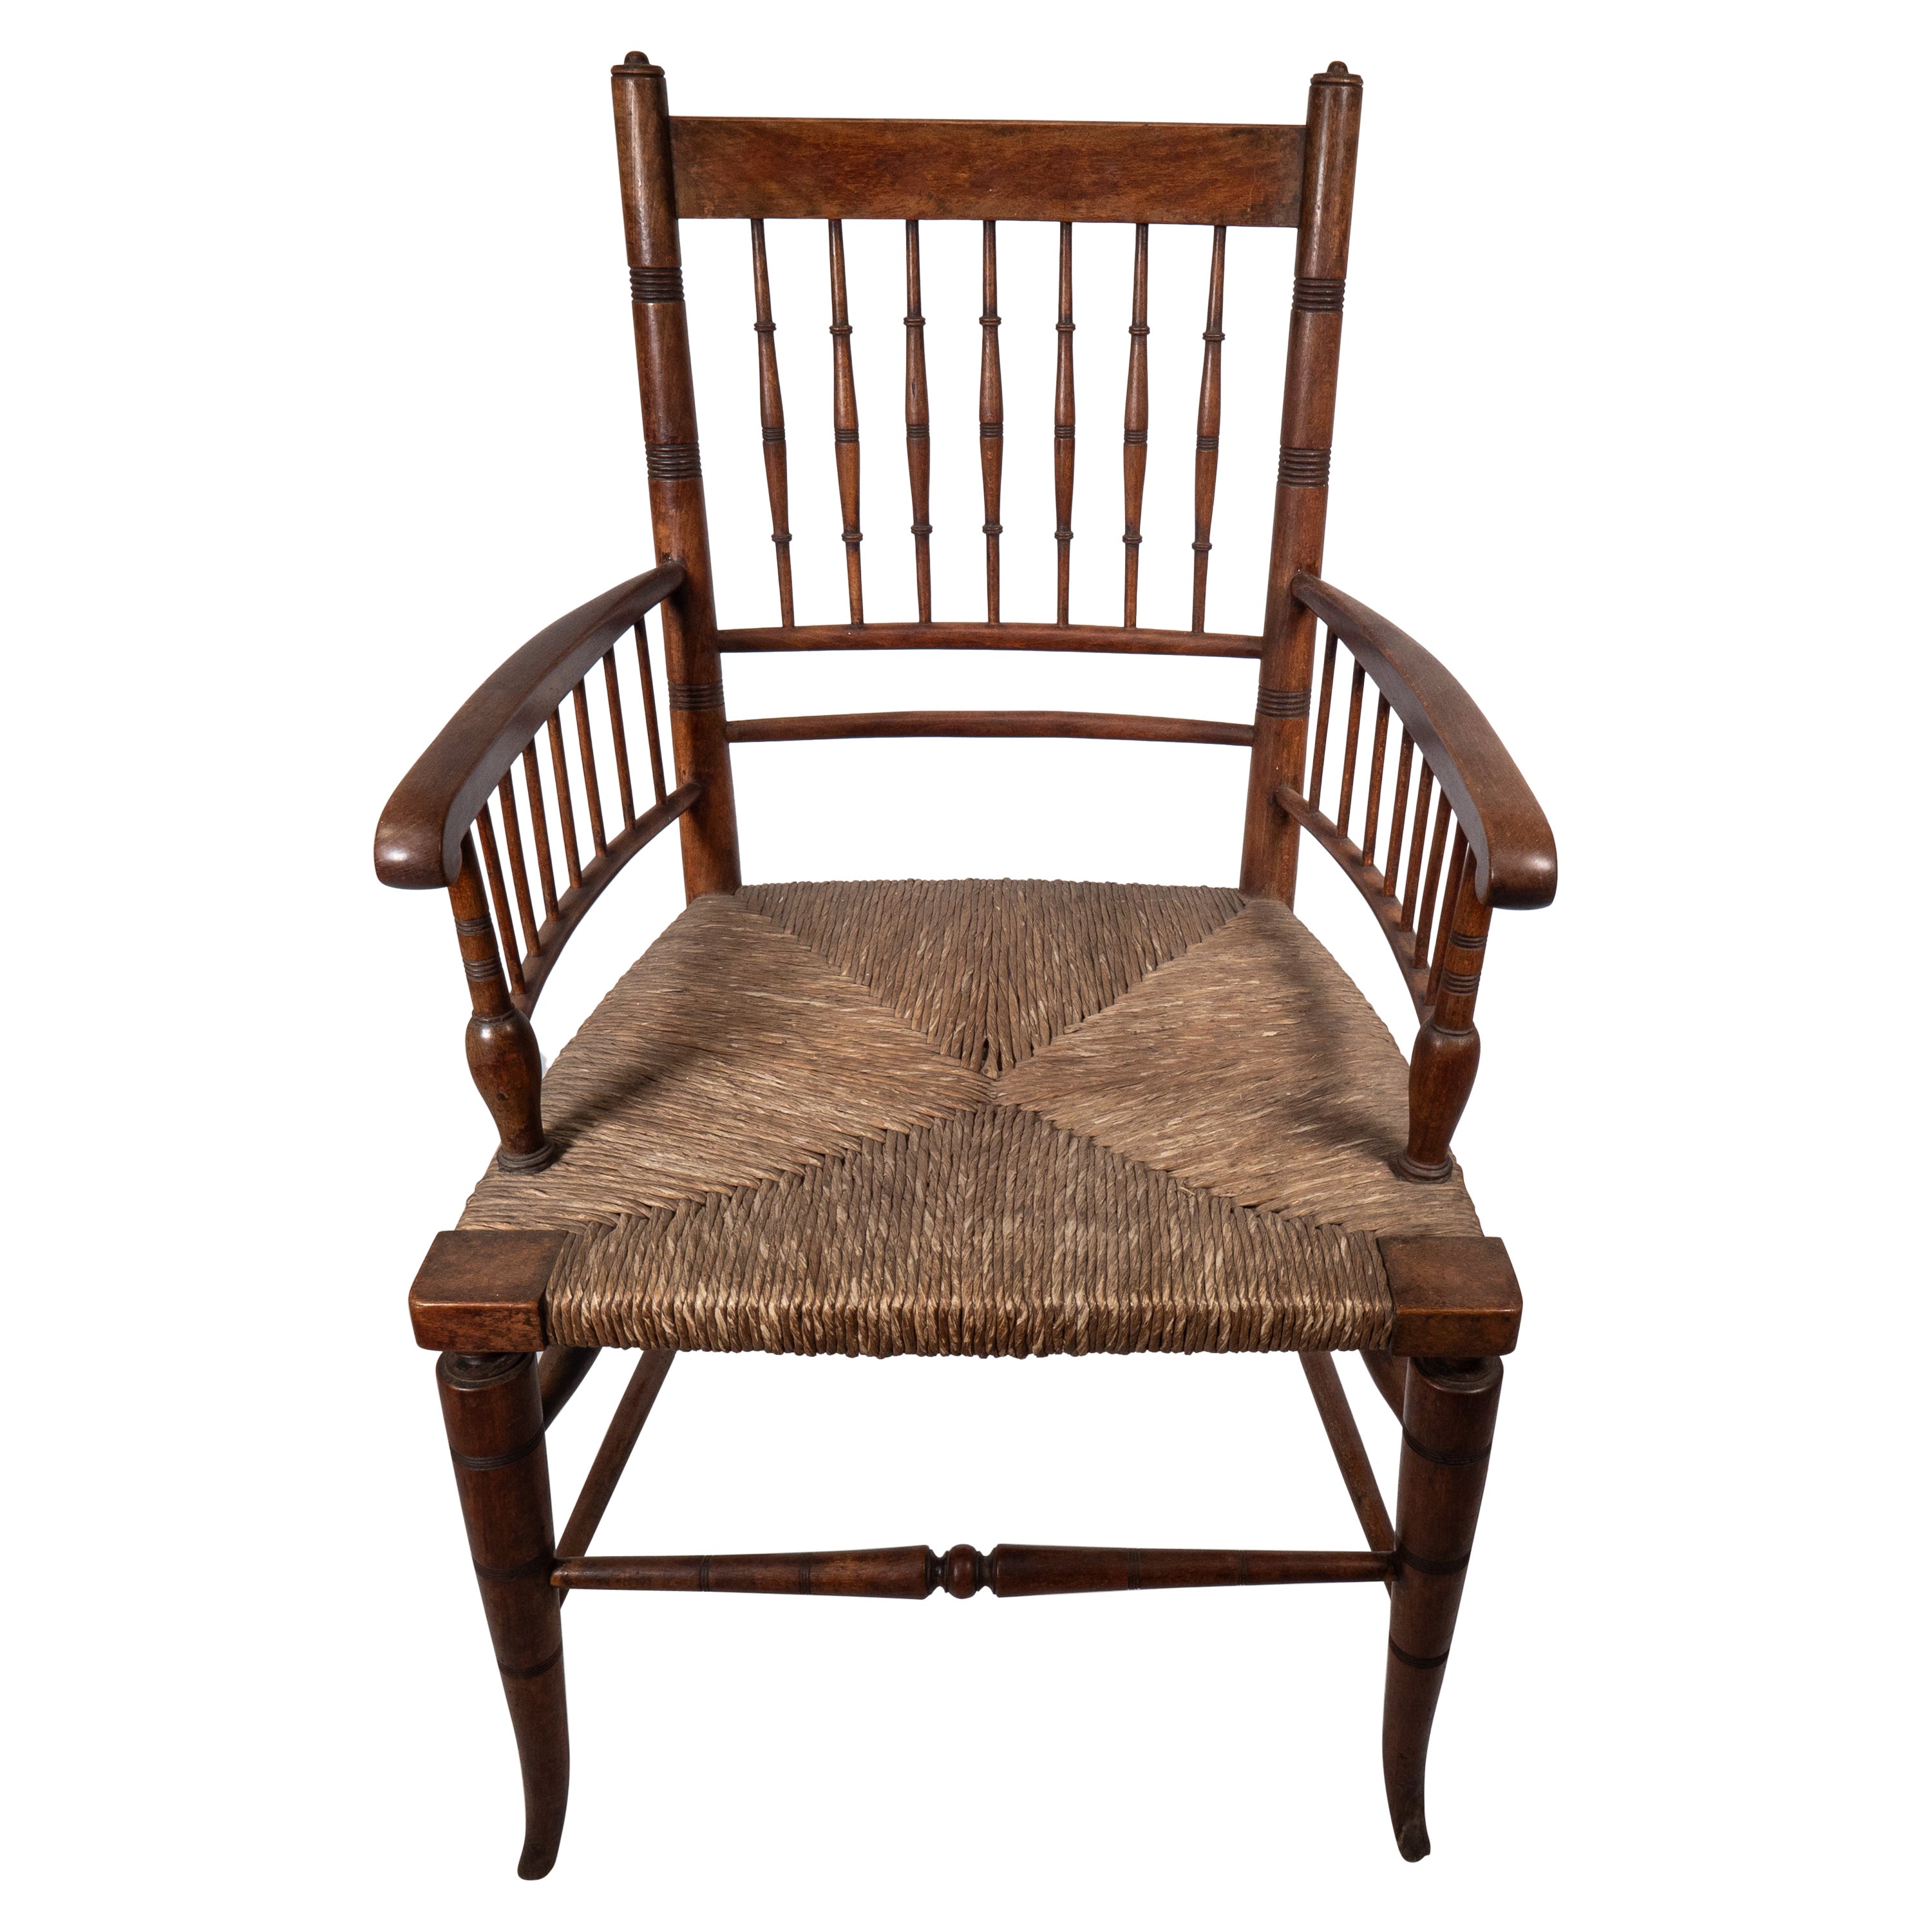 Liberty and Co attributed, in the style of a Morris and Co Sussex armchair. An Aesthetic Movement rush seat armchair with incised turnings to the back and below the arms with elegant splayed front legs.
